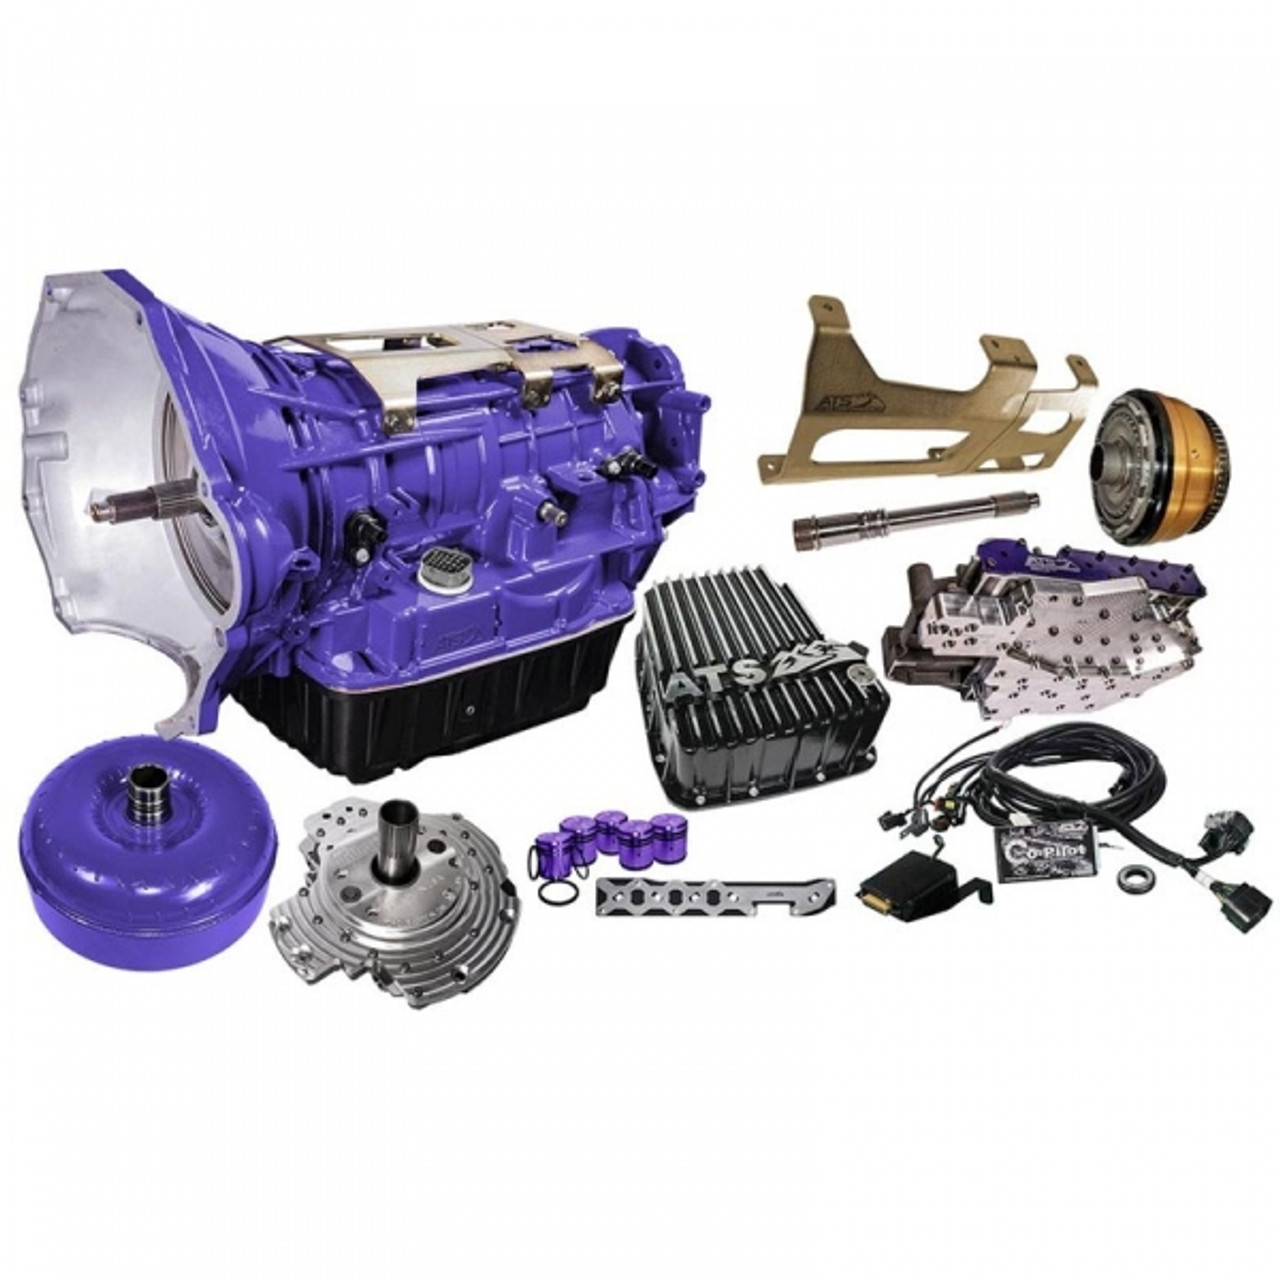 ATS Stage 3 68RFE 4WD Transmission Package with Co-Pilot 2007.5 to 2011 6.7L Cummins (ATS3096362326)-Main View